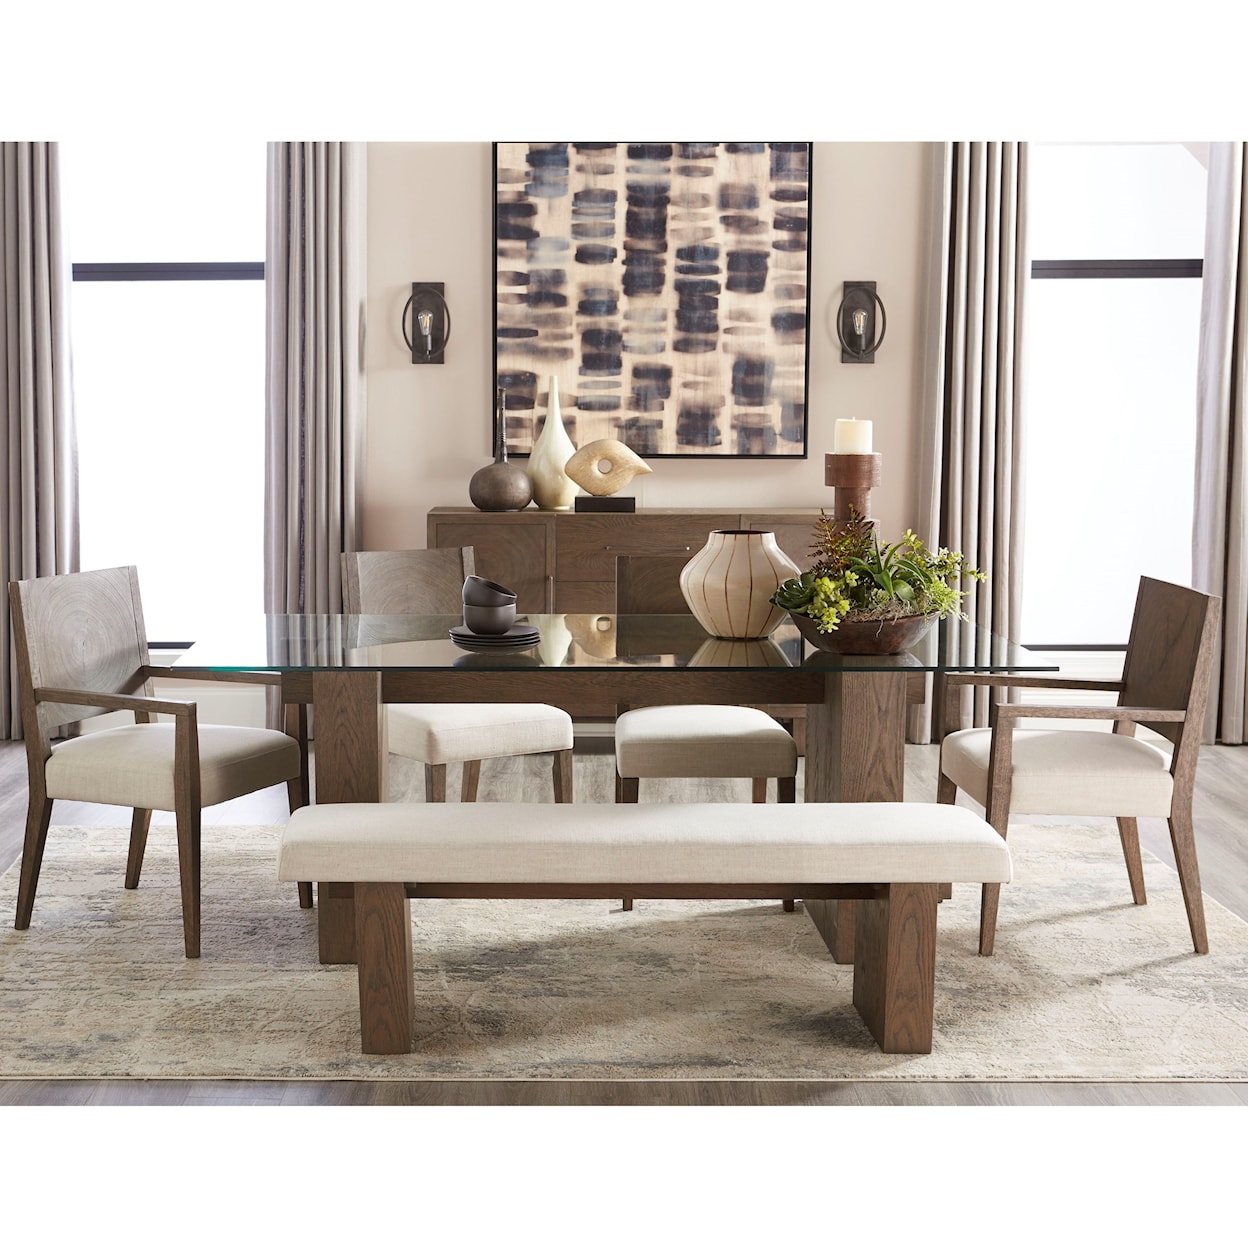 Modus International Oakland 6-Piece Dining Table Set with Bench